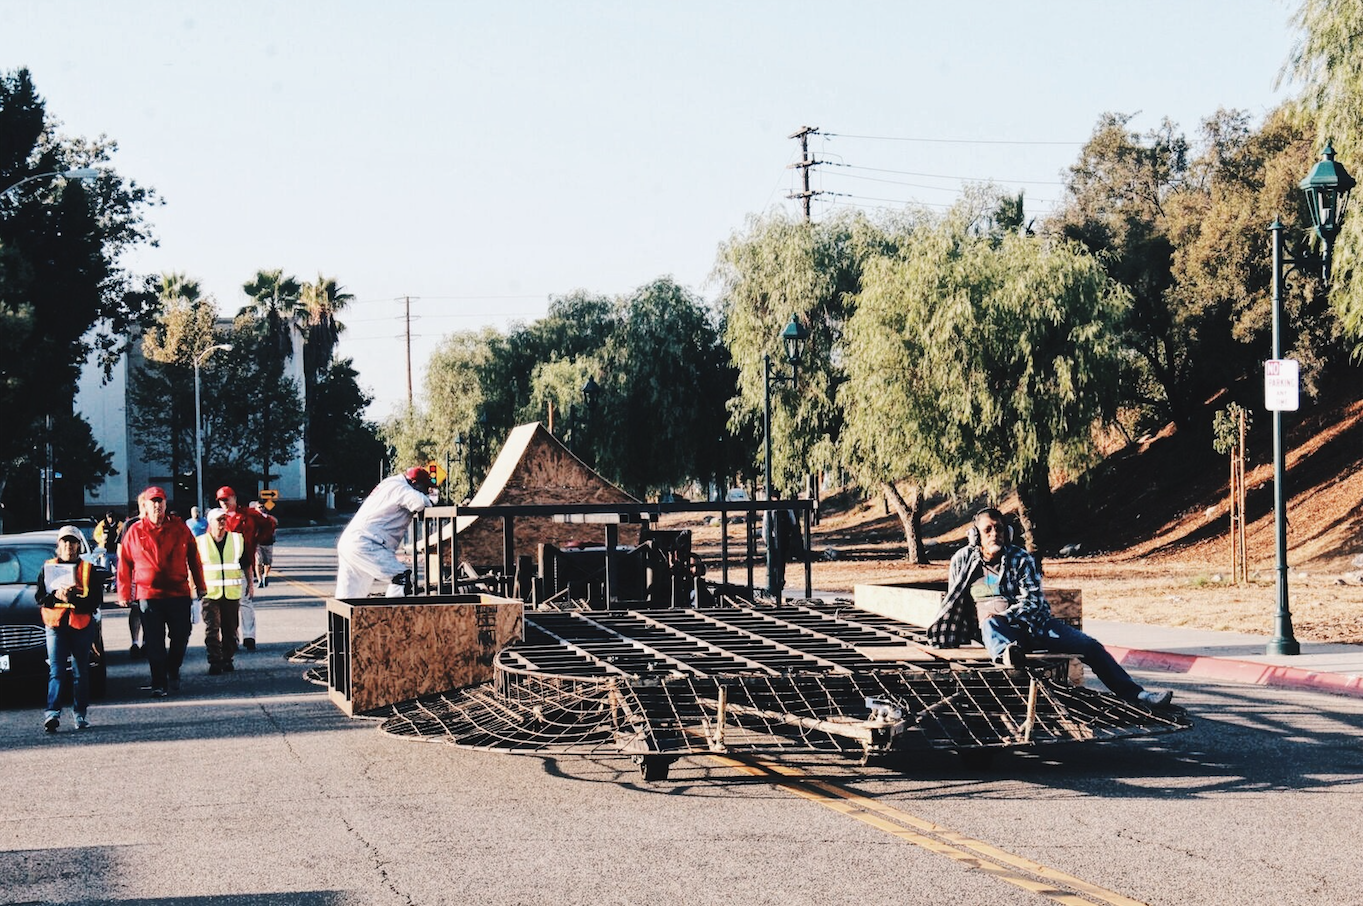 Workers assembling large metal framework on a sunny street with bystanders watching